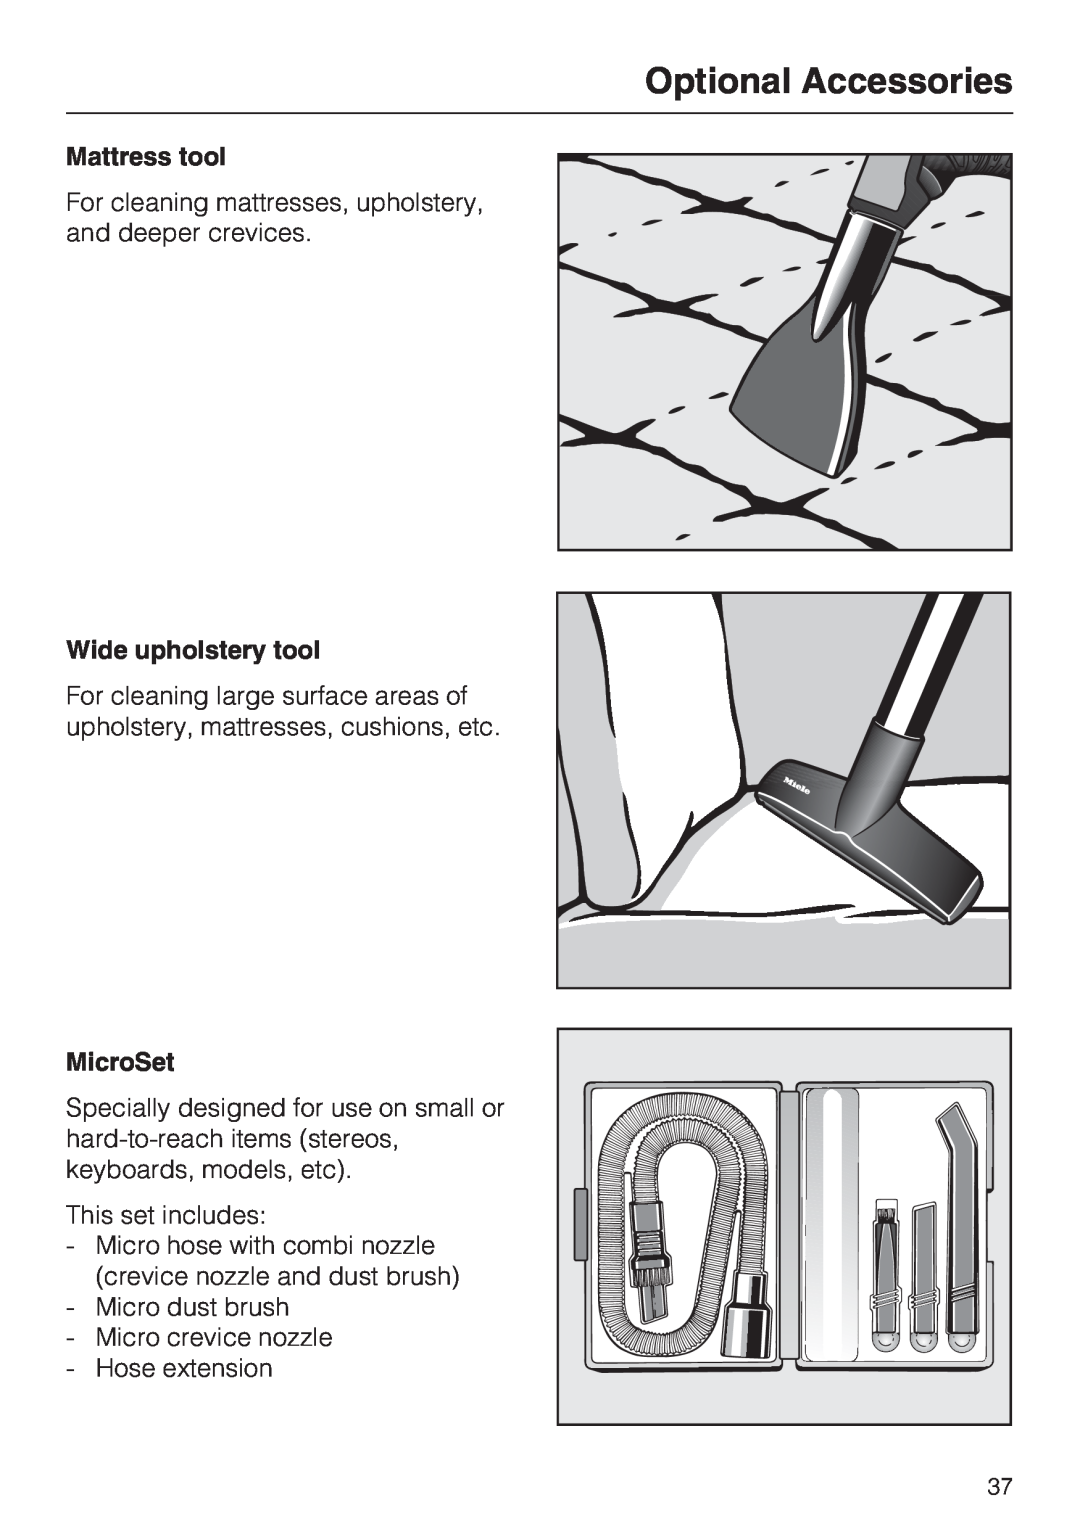 Miele S 7000 operating instructions Mattress tool, Wide upholstery tool, MicroSet, Optional Accessories 